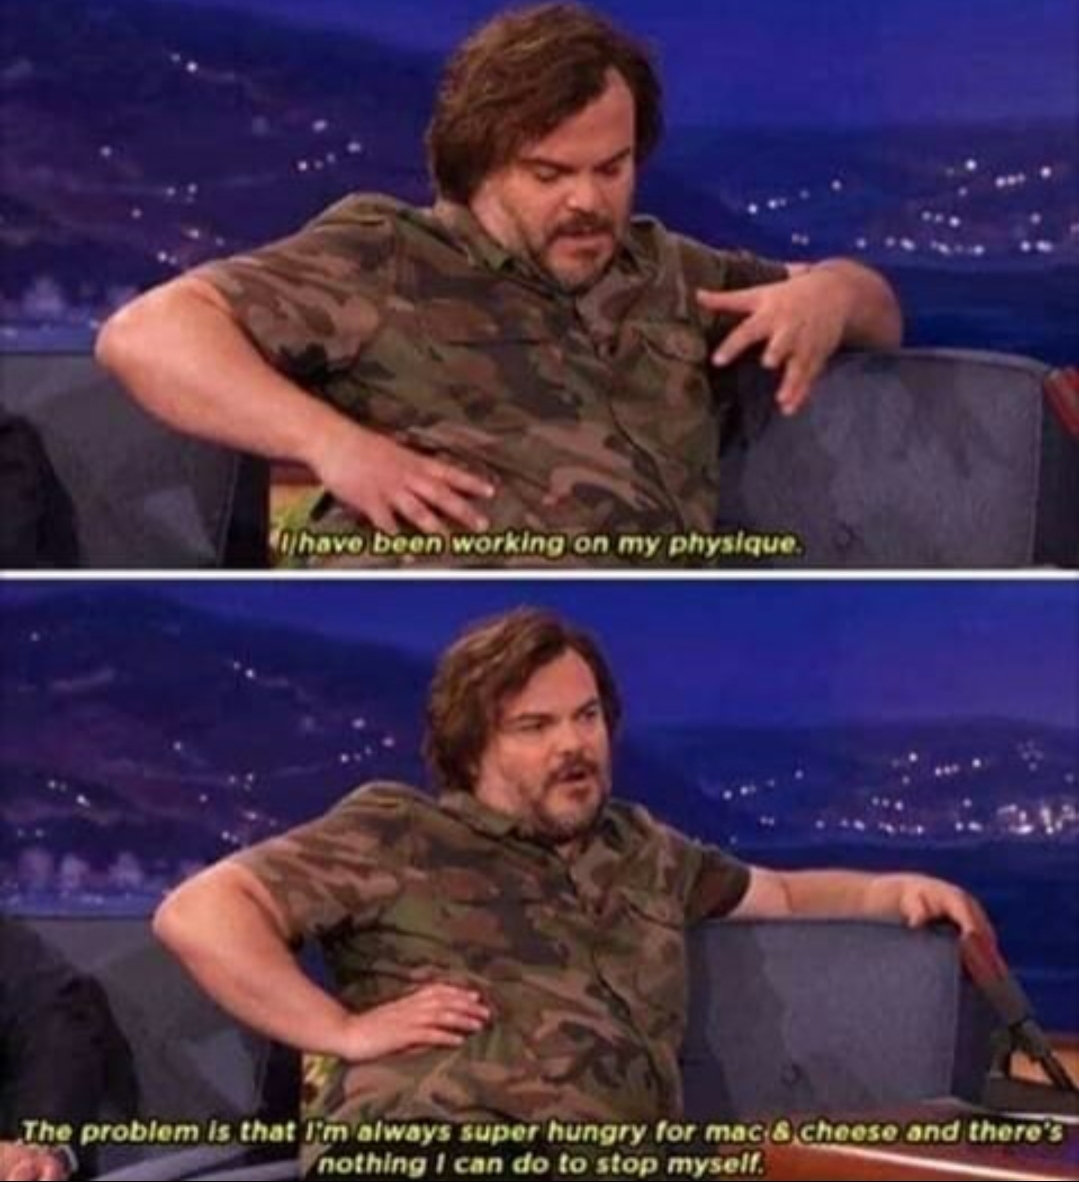 wholesome meme - jack black mac and cheese - I have been working on my physique. The problem is that I'm always super hungry for mac a cheese and there's nothing I can do to stop myself